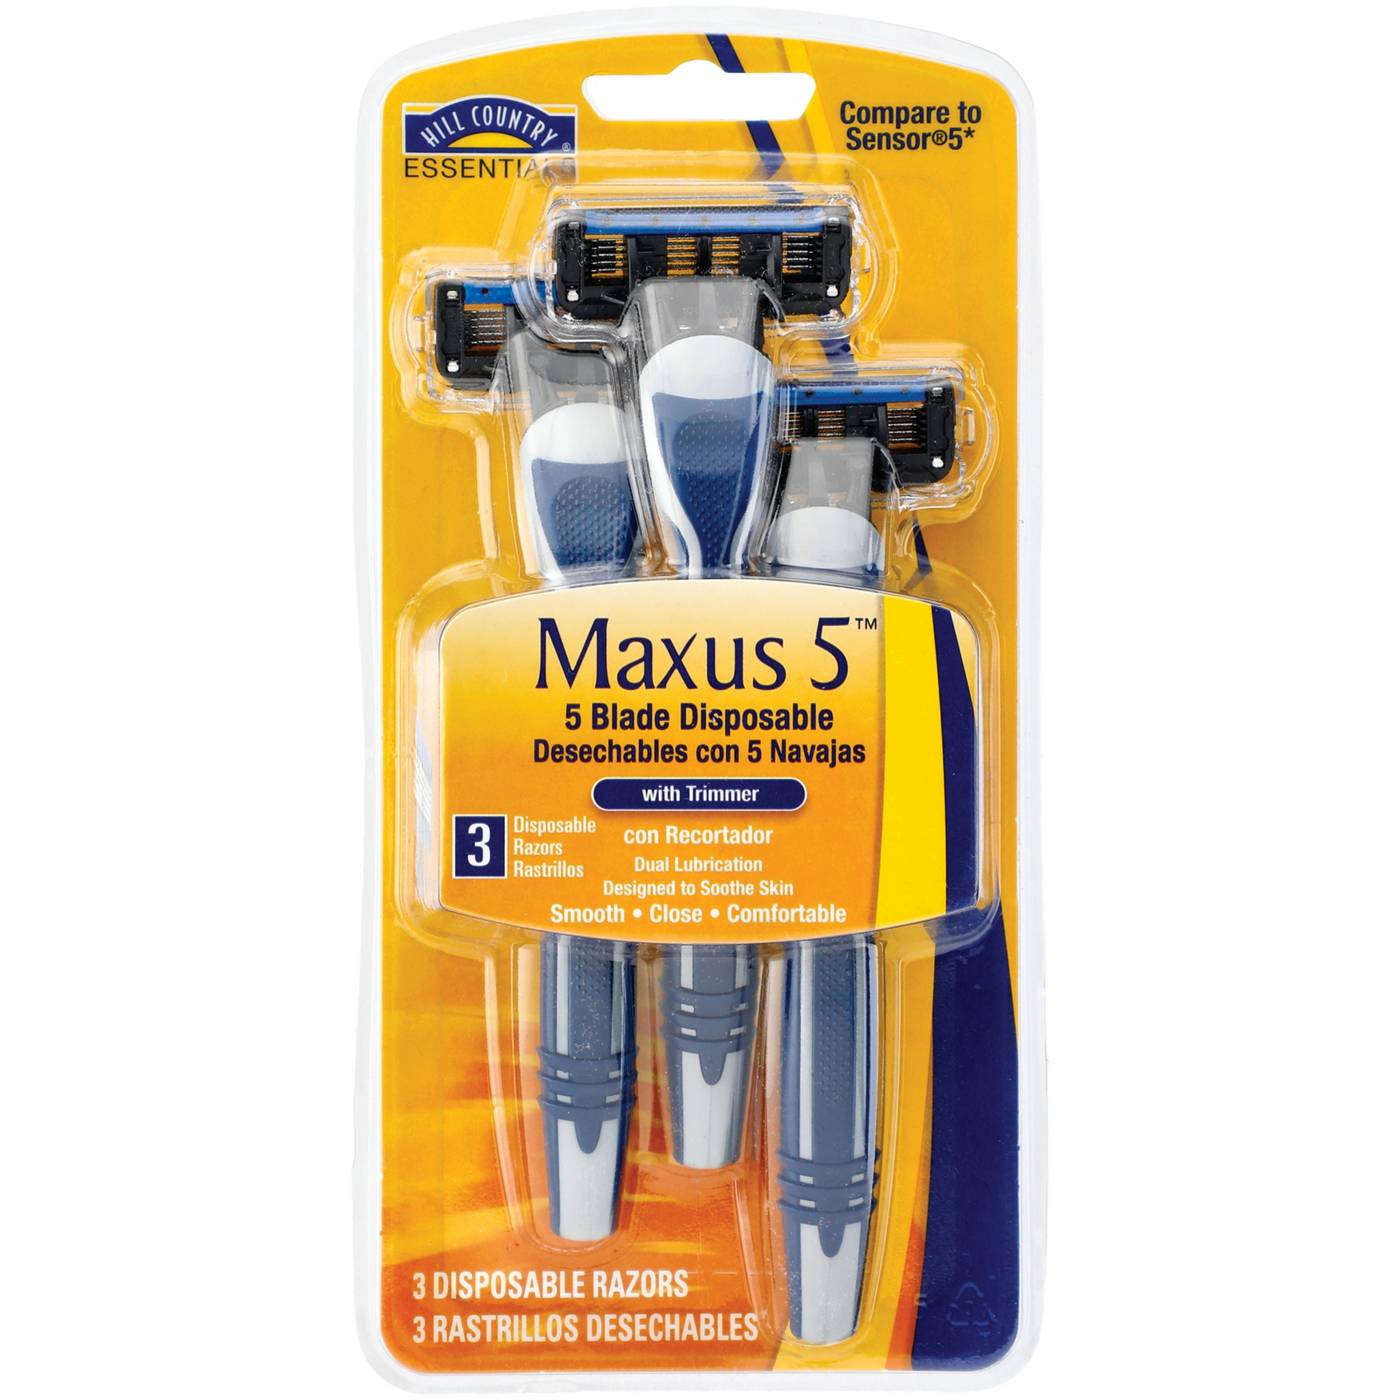 Hill Country Essentials 5 Blade Disposable Men’s Maxus Razors; image 1 of 6